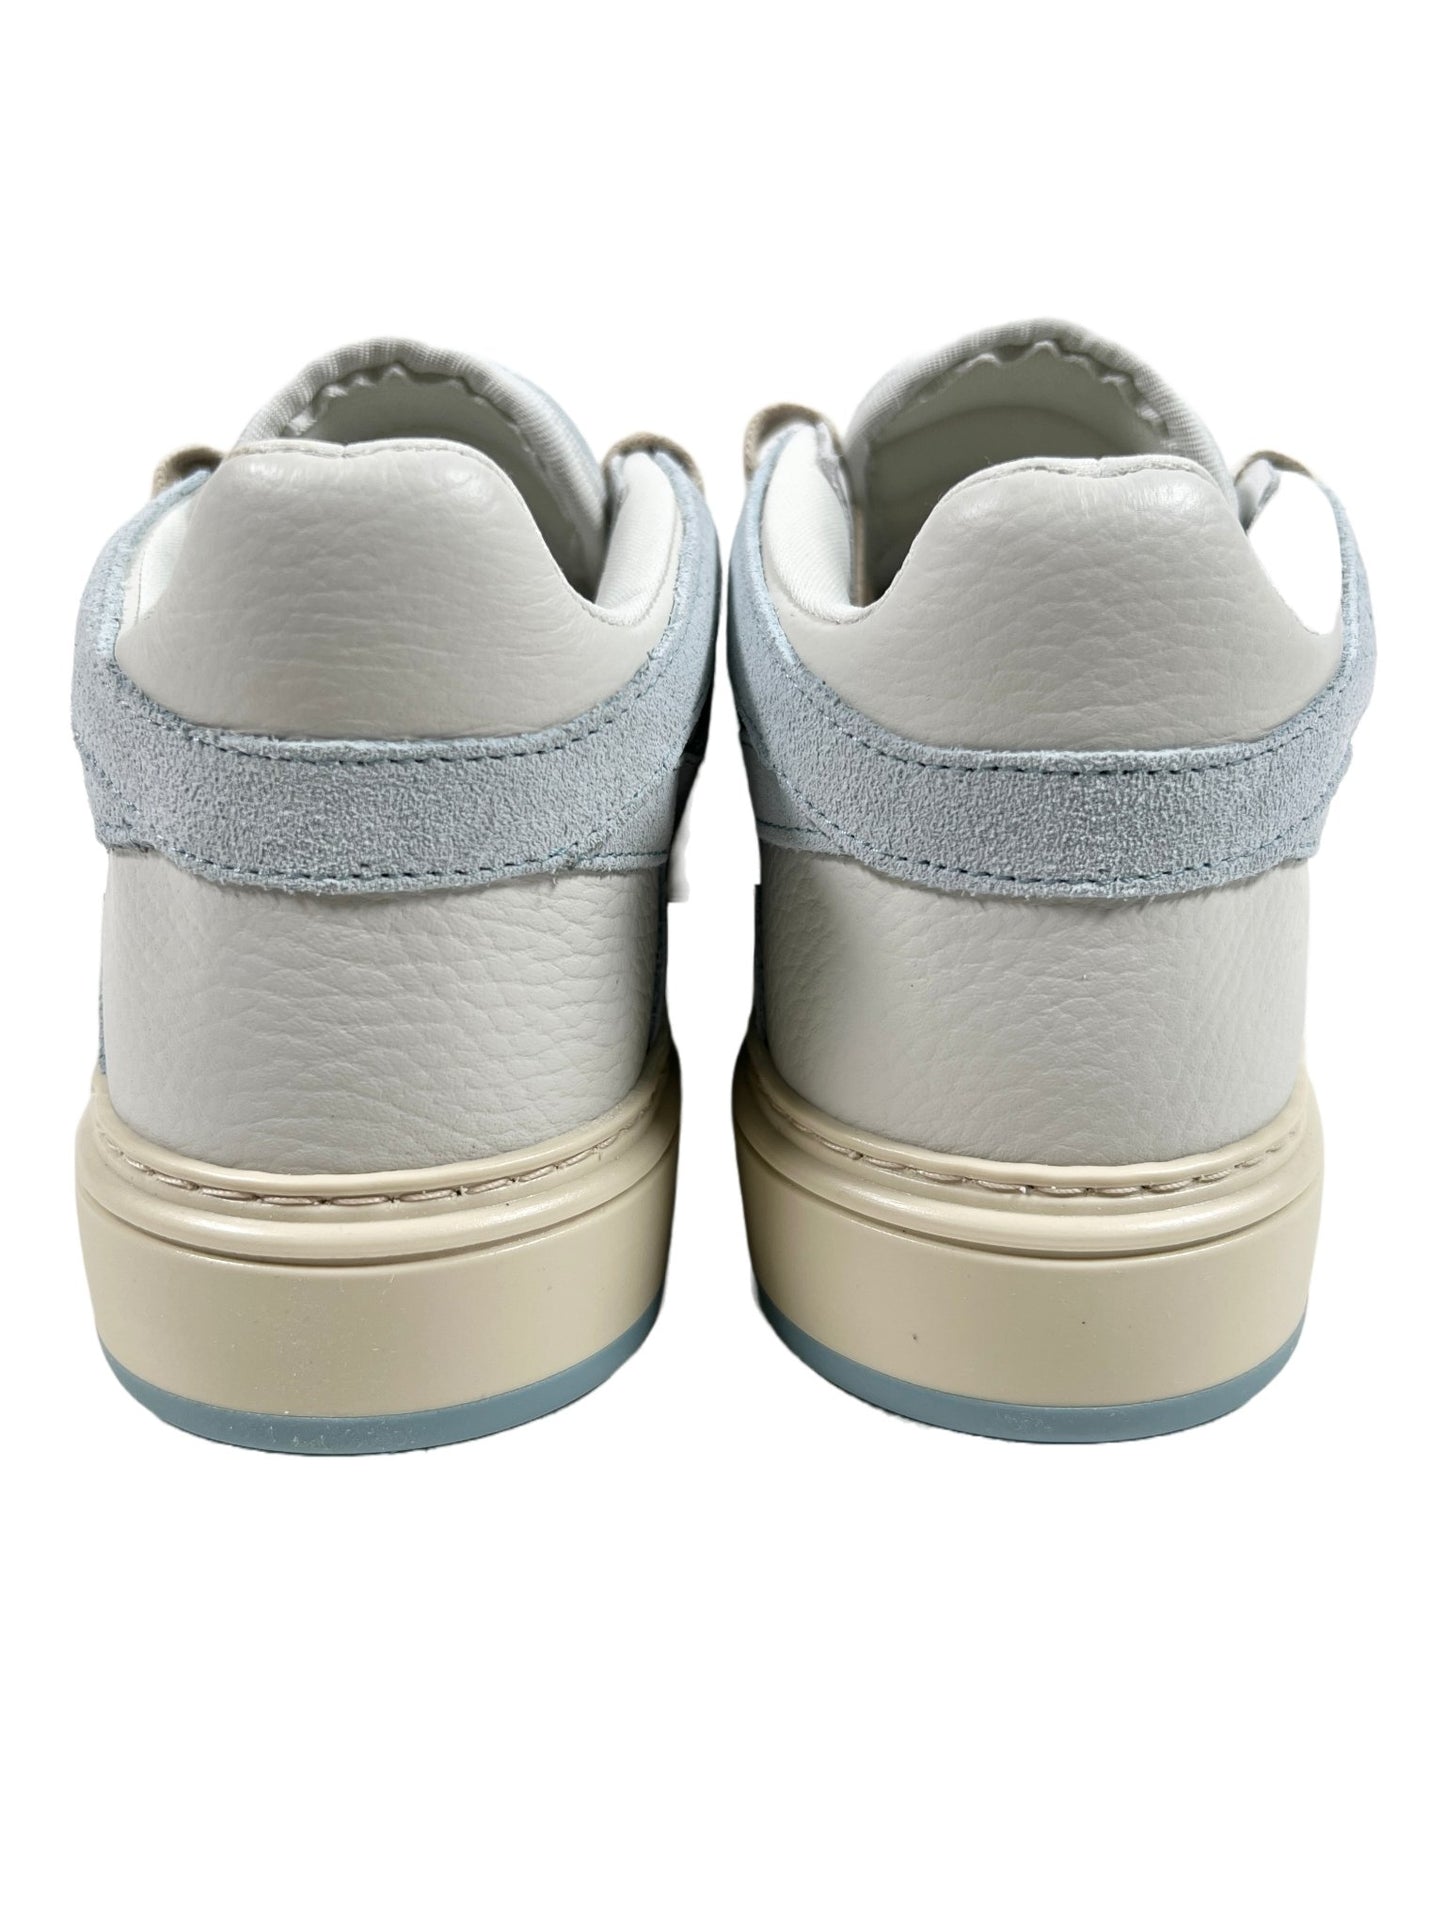 A pair of REPRESENT sneakers with blue soles, crafted from tumbled leather.